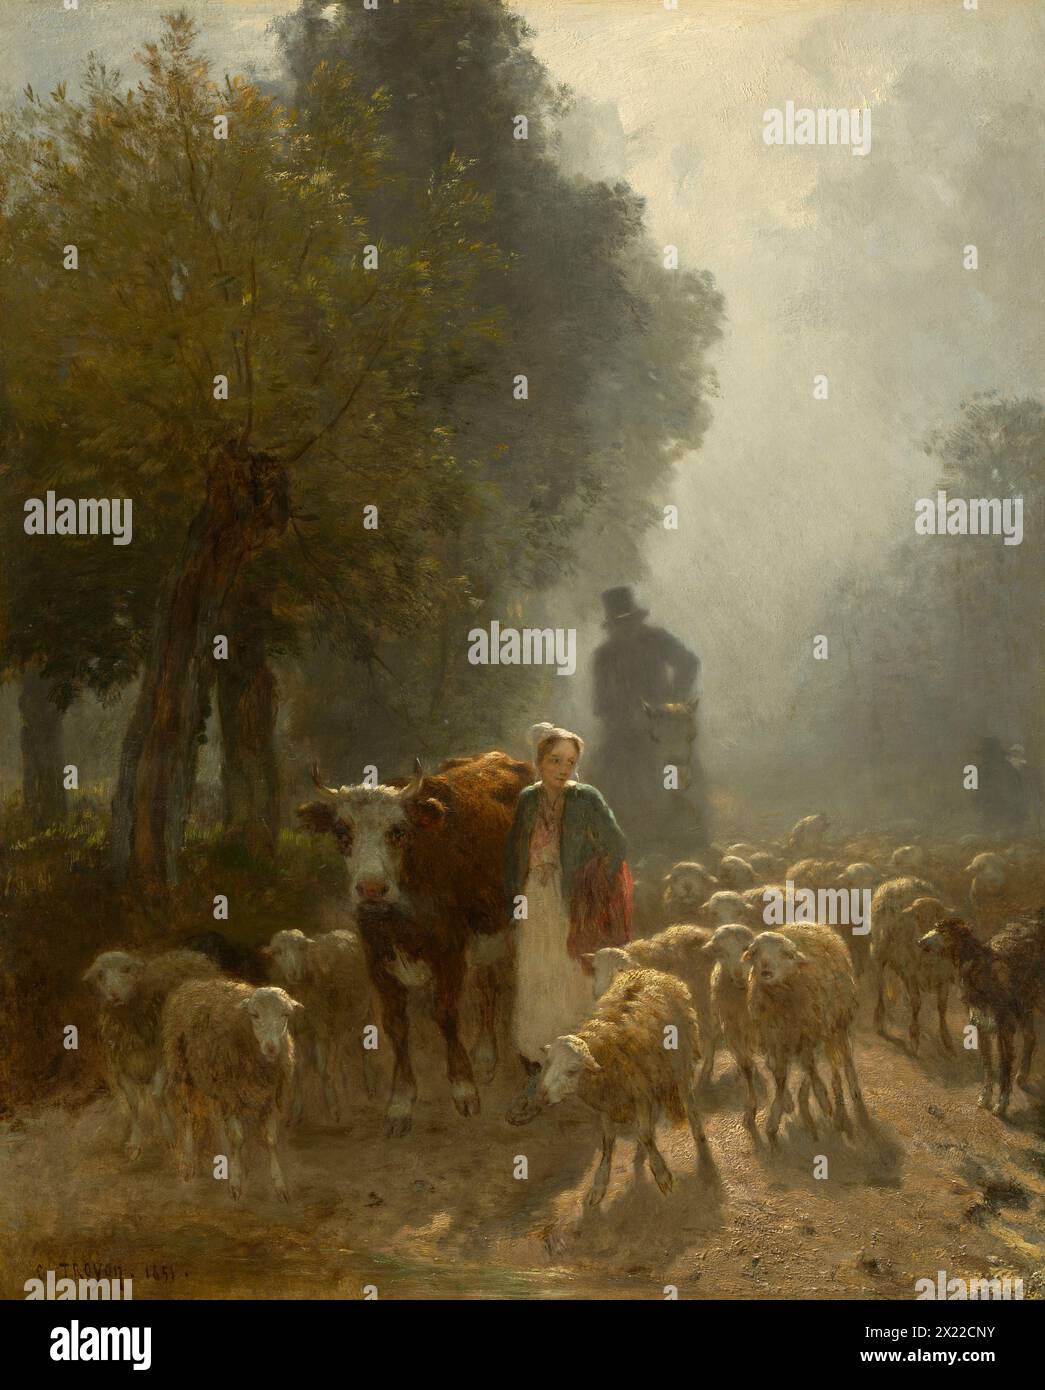 Going To Market On A Misty Morning, 1851. A shepherdess emerges from the morning mist, leading a cow and a flock of unruly sheep down a country road. Behind her, a man on horseback, silhouetted against the light, is impeded in his progress. Stock Photo